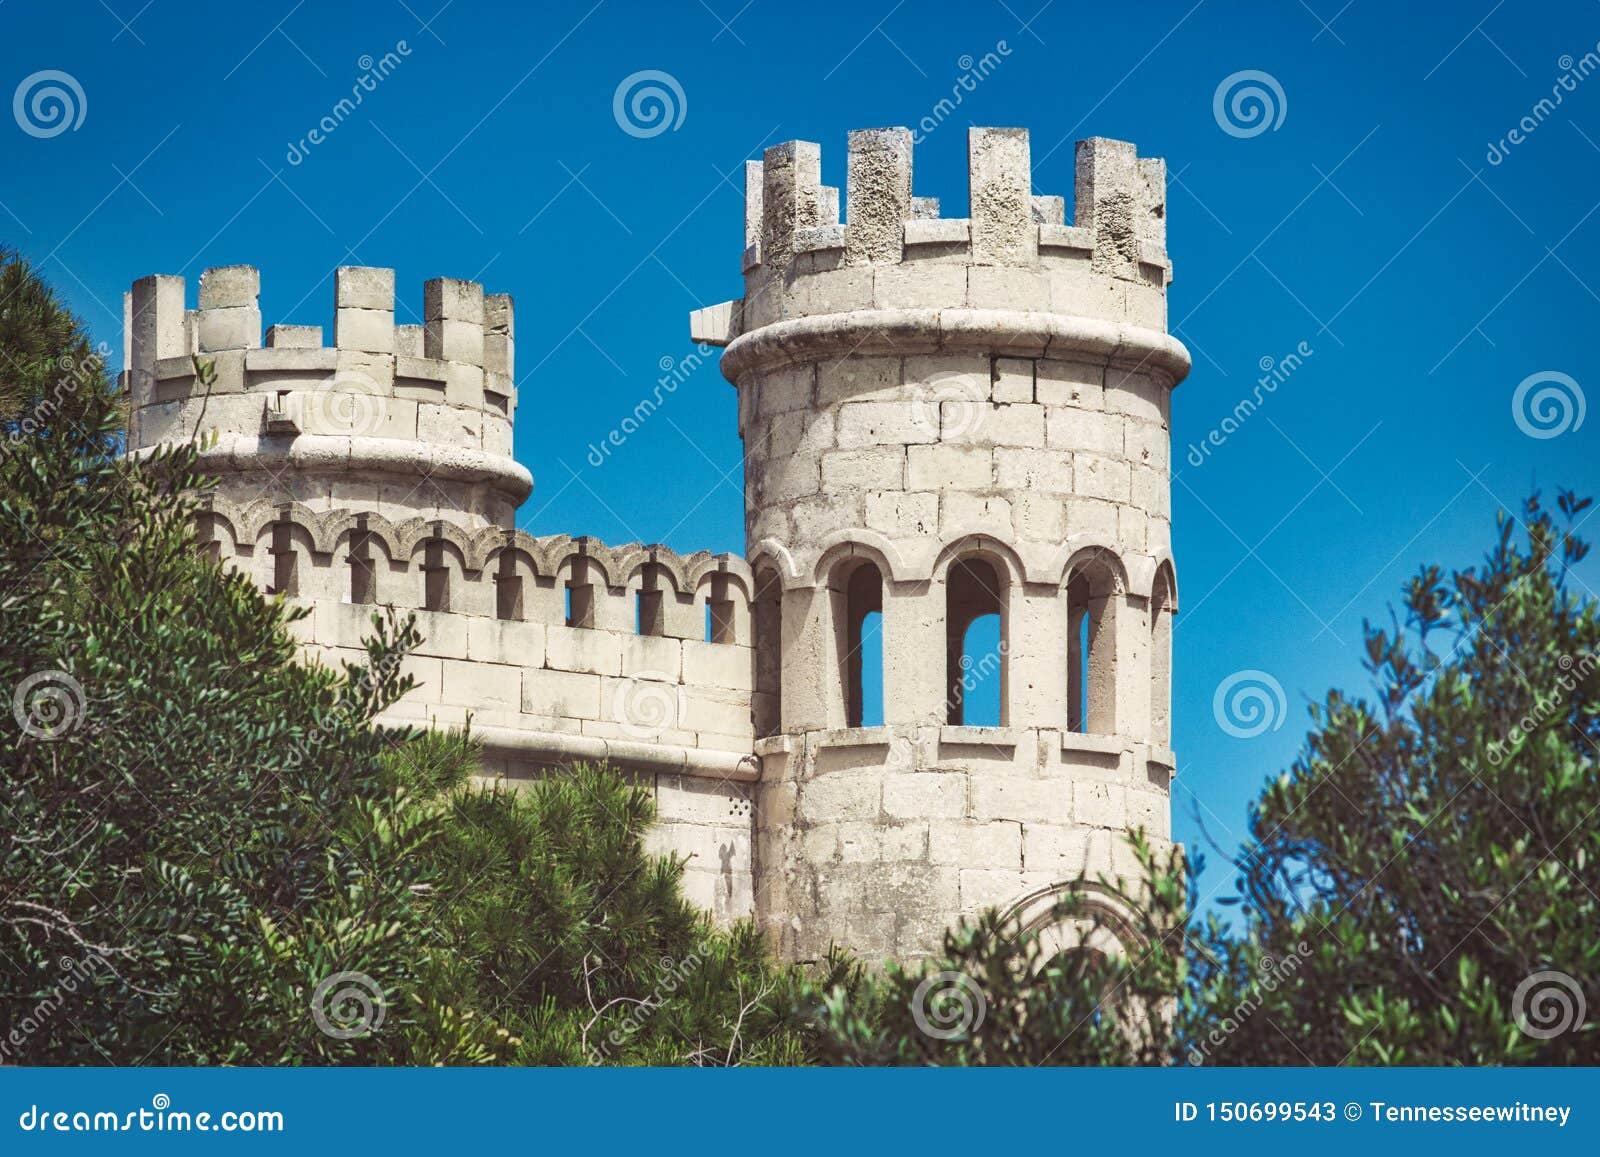 White Stone Turrets of a Medieval Castle Against a Blue Sky Background